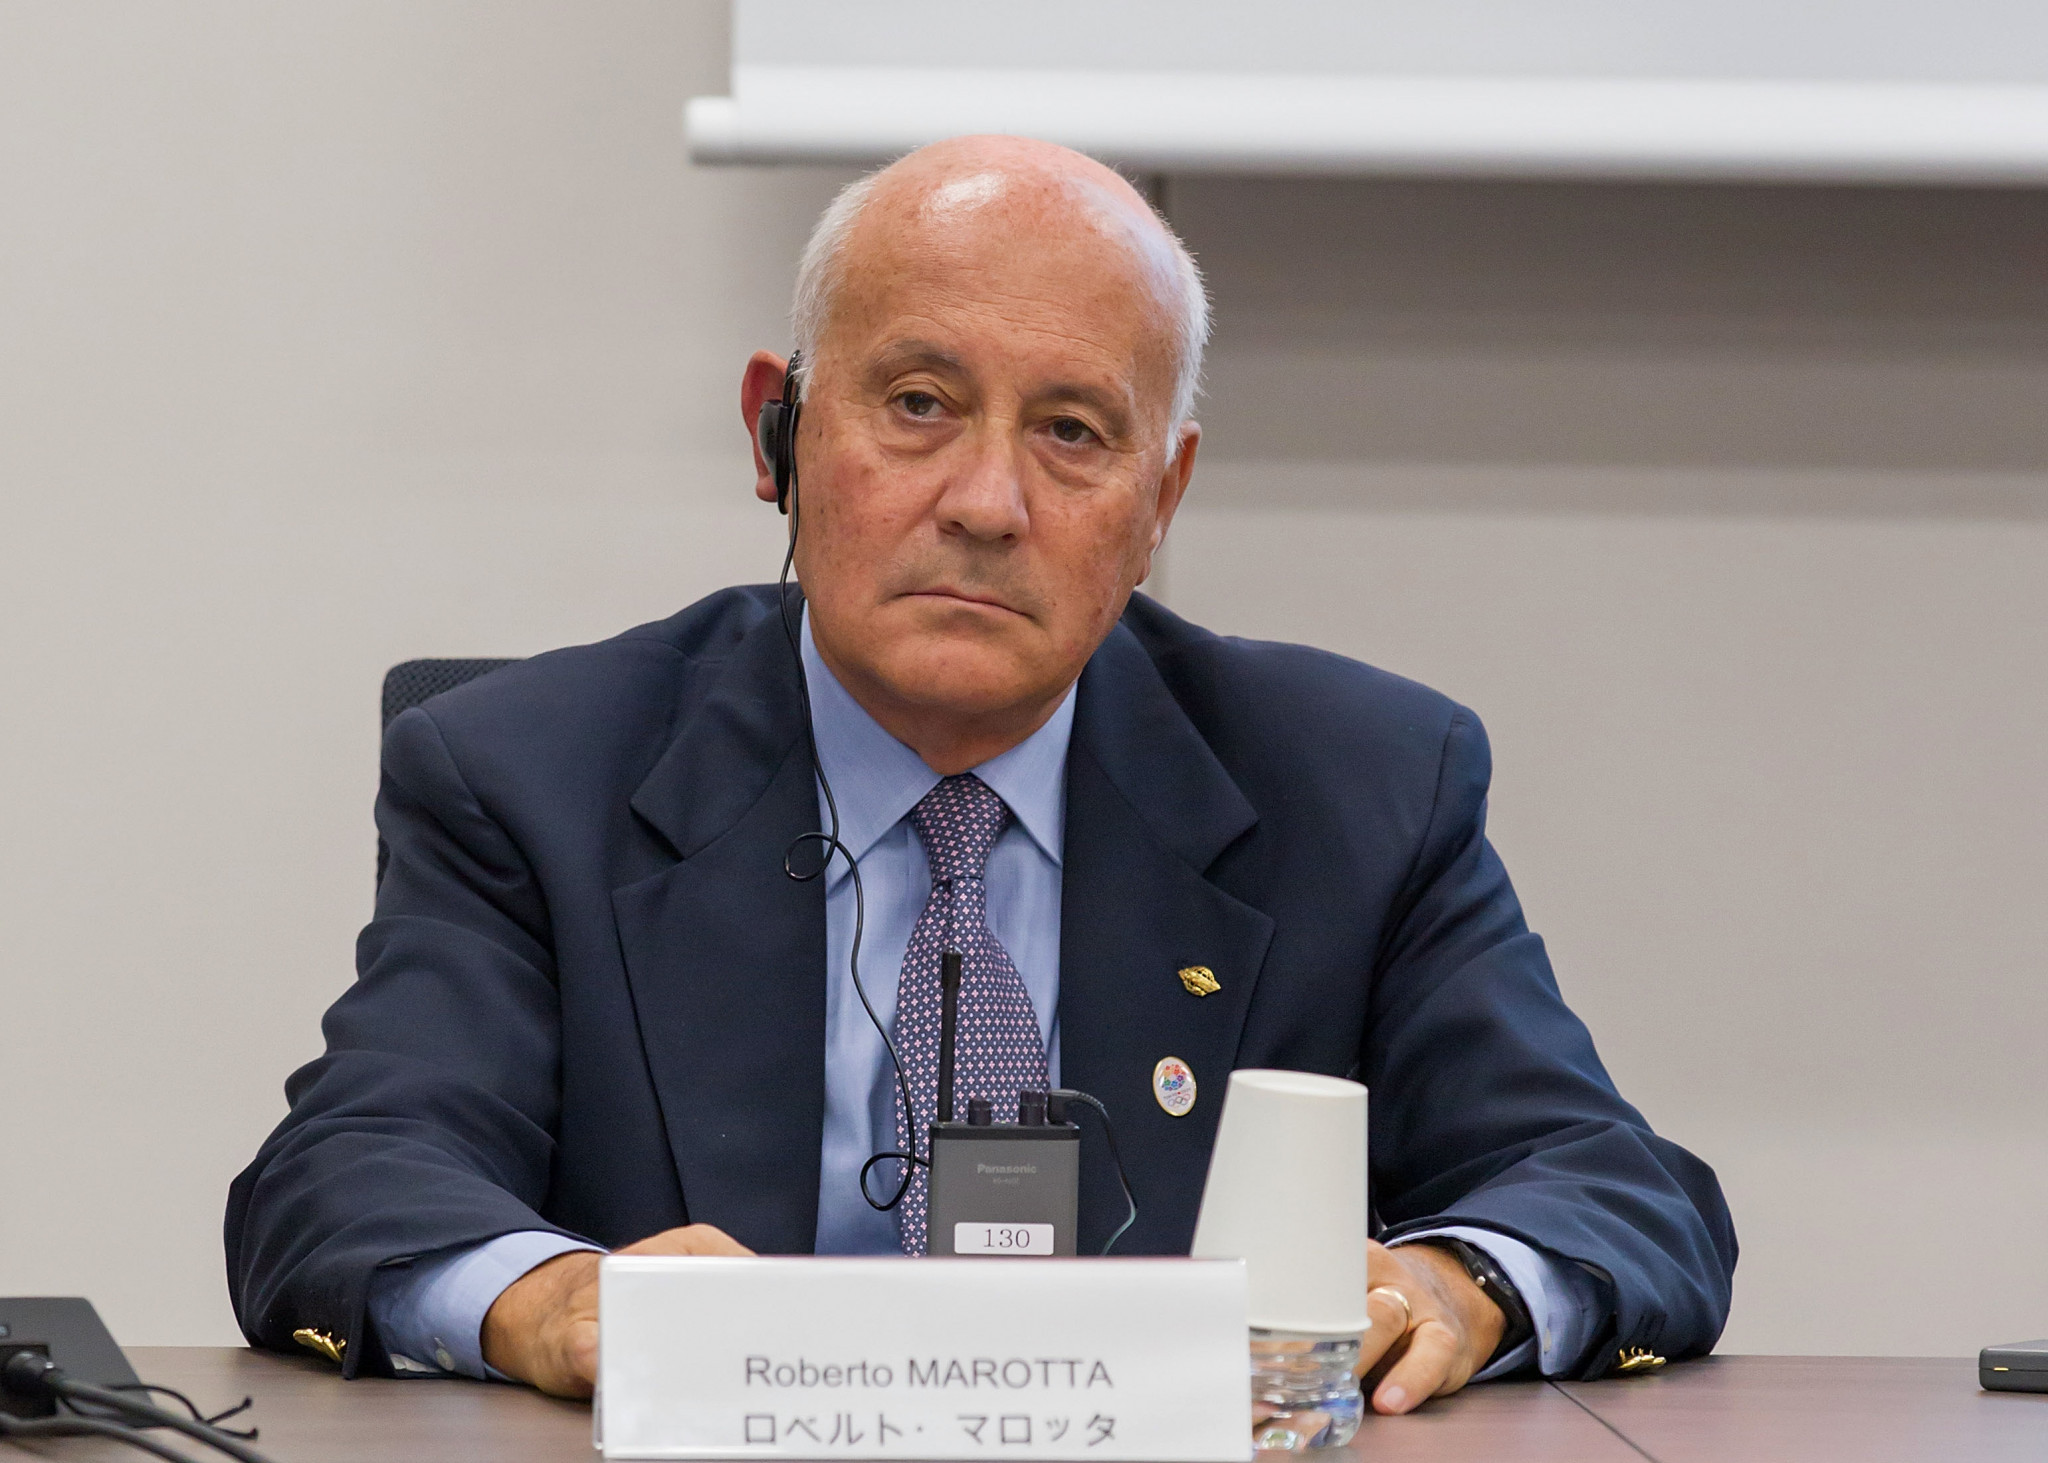 Roberto Marotta was ratified as the secretary general of World Skate ©Getty Images